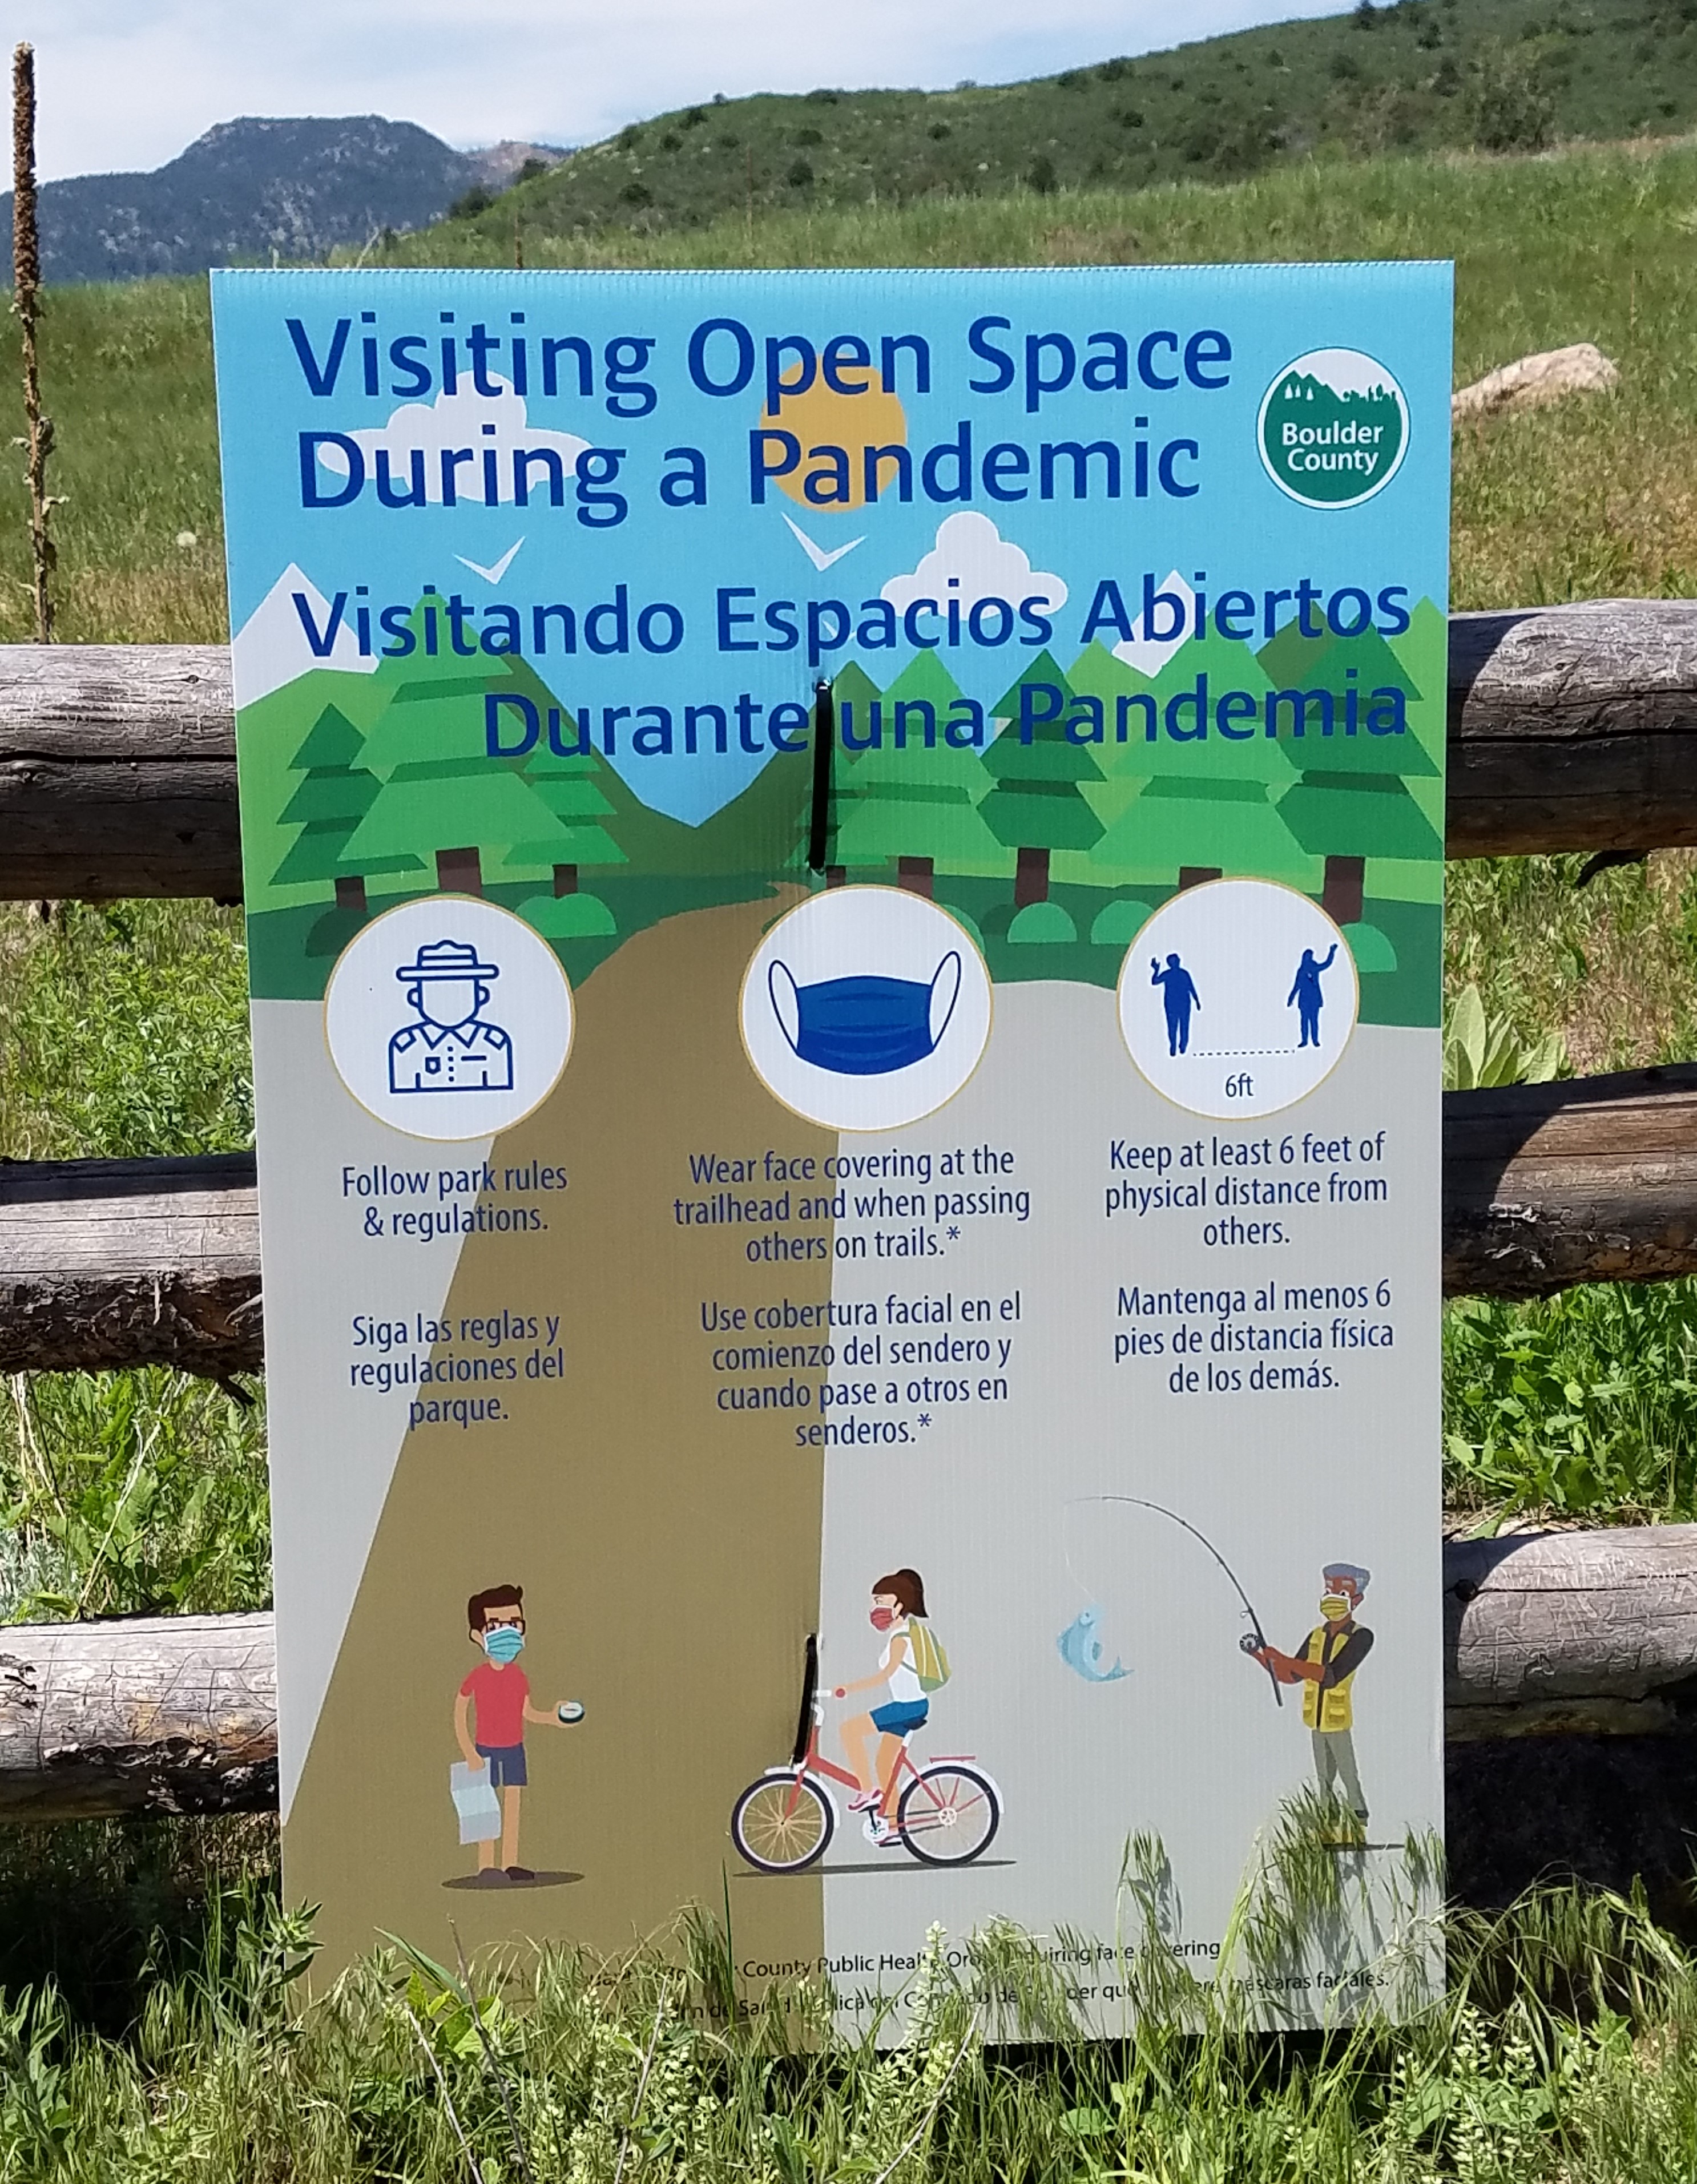 Photo of an outdoor trail sign that says, "Visiting Open Space During a Pandemic." At the bottom of the sign, there are graphics to explain that one must follow park rules, wear appropriate face masks, and keep socially distanced, a minimum of 6 feet from others.